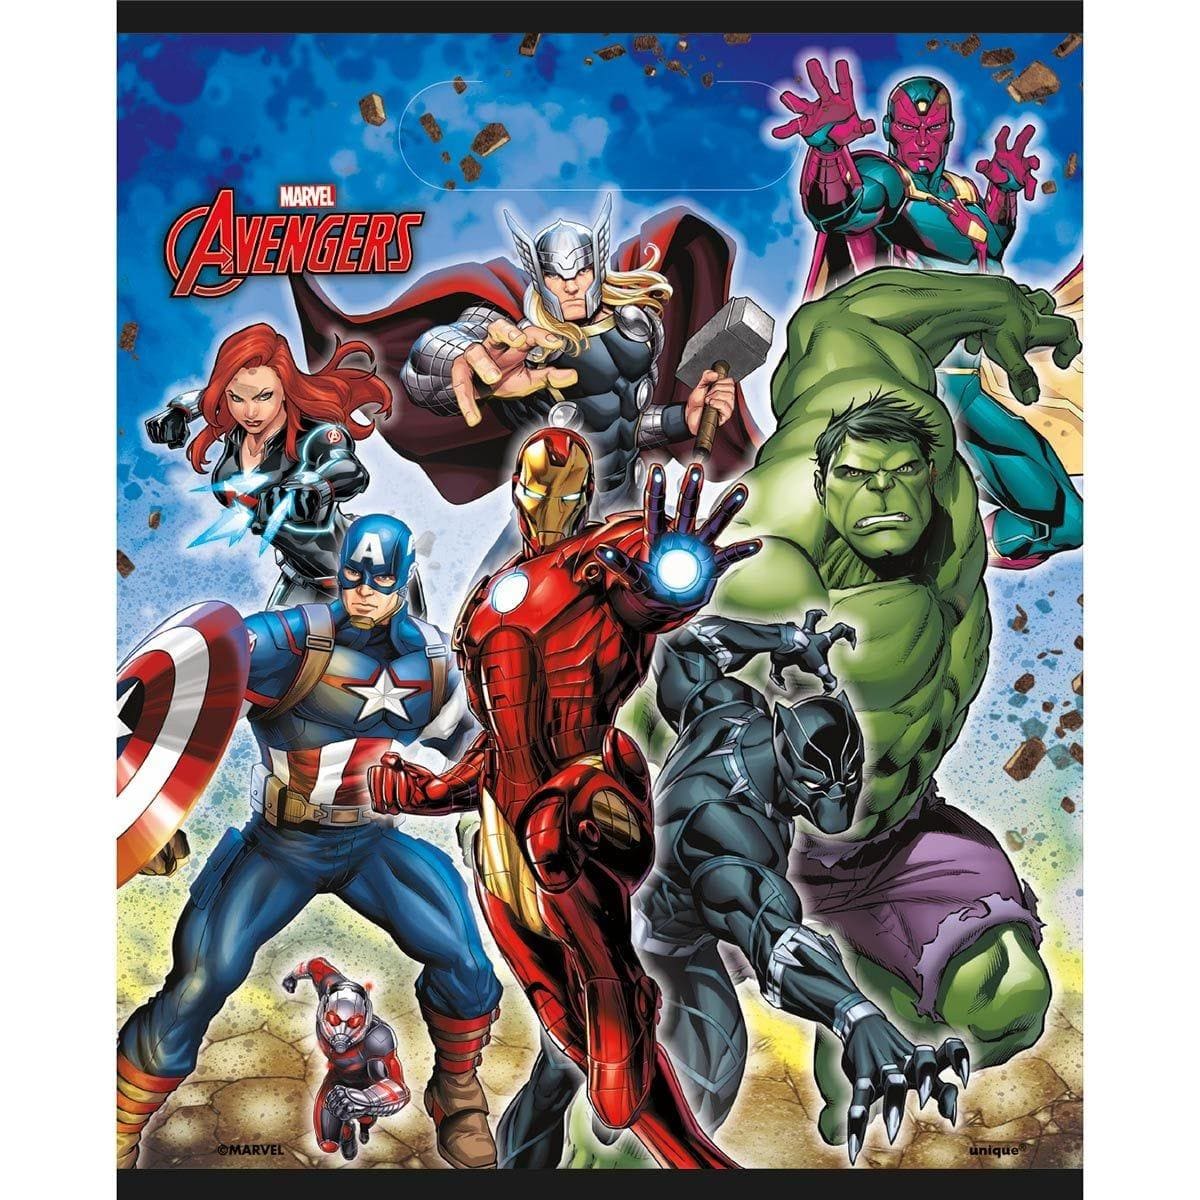 Buy Kids Birthday Avengers Assemble favor bags, 8 per package sold at Party Expert